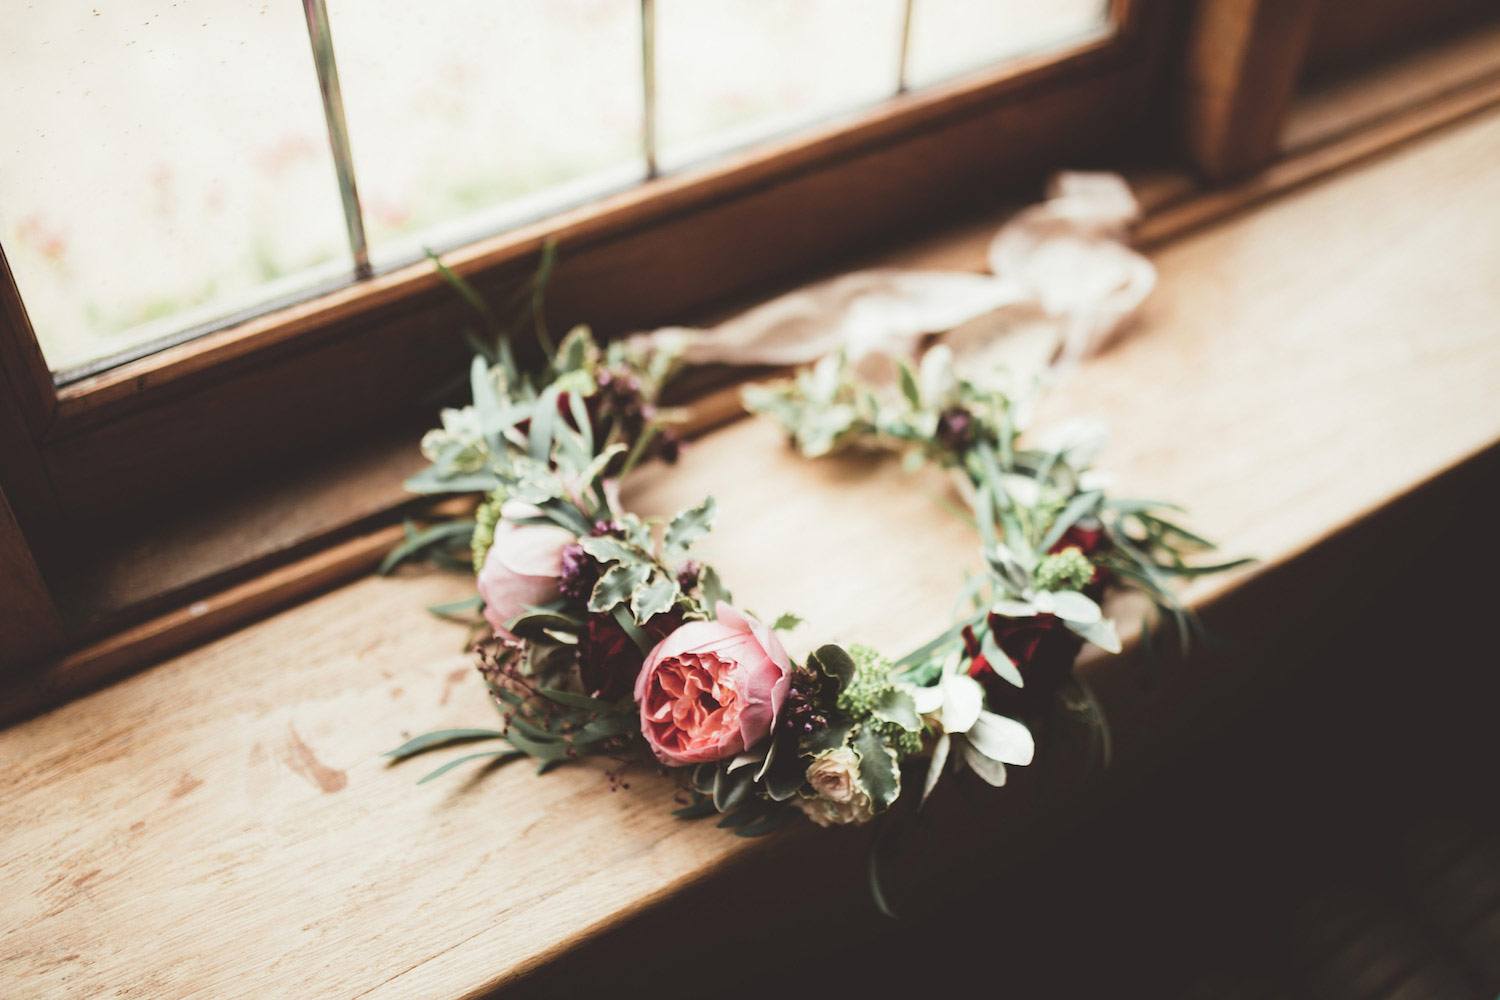 Natural rose flower crown on window sill